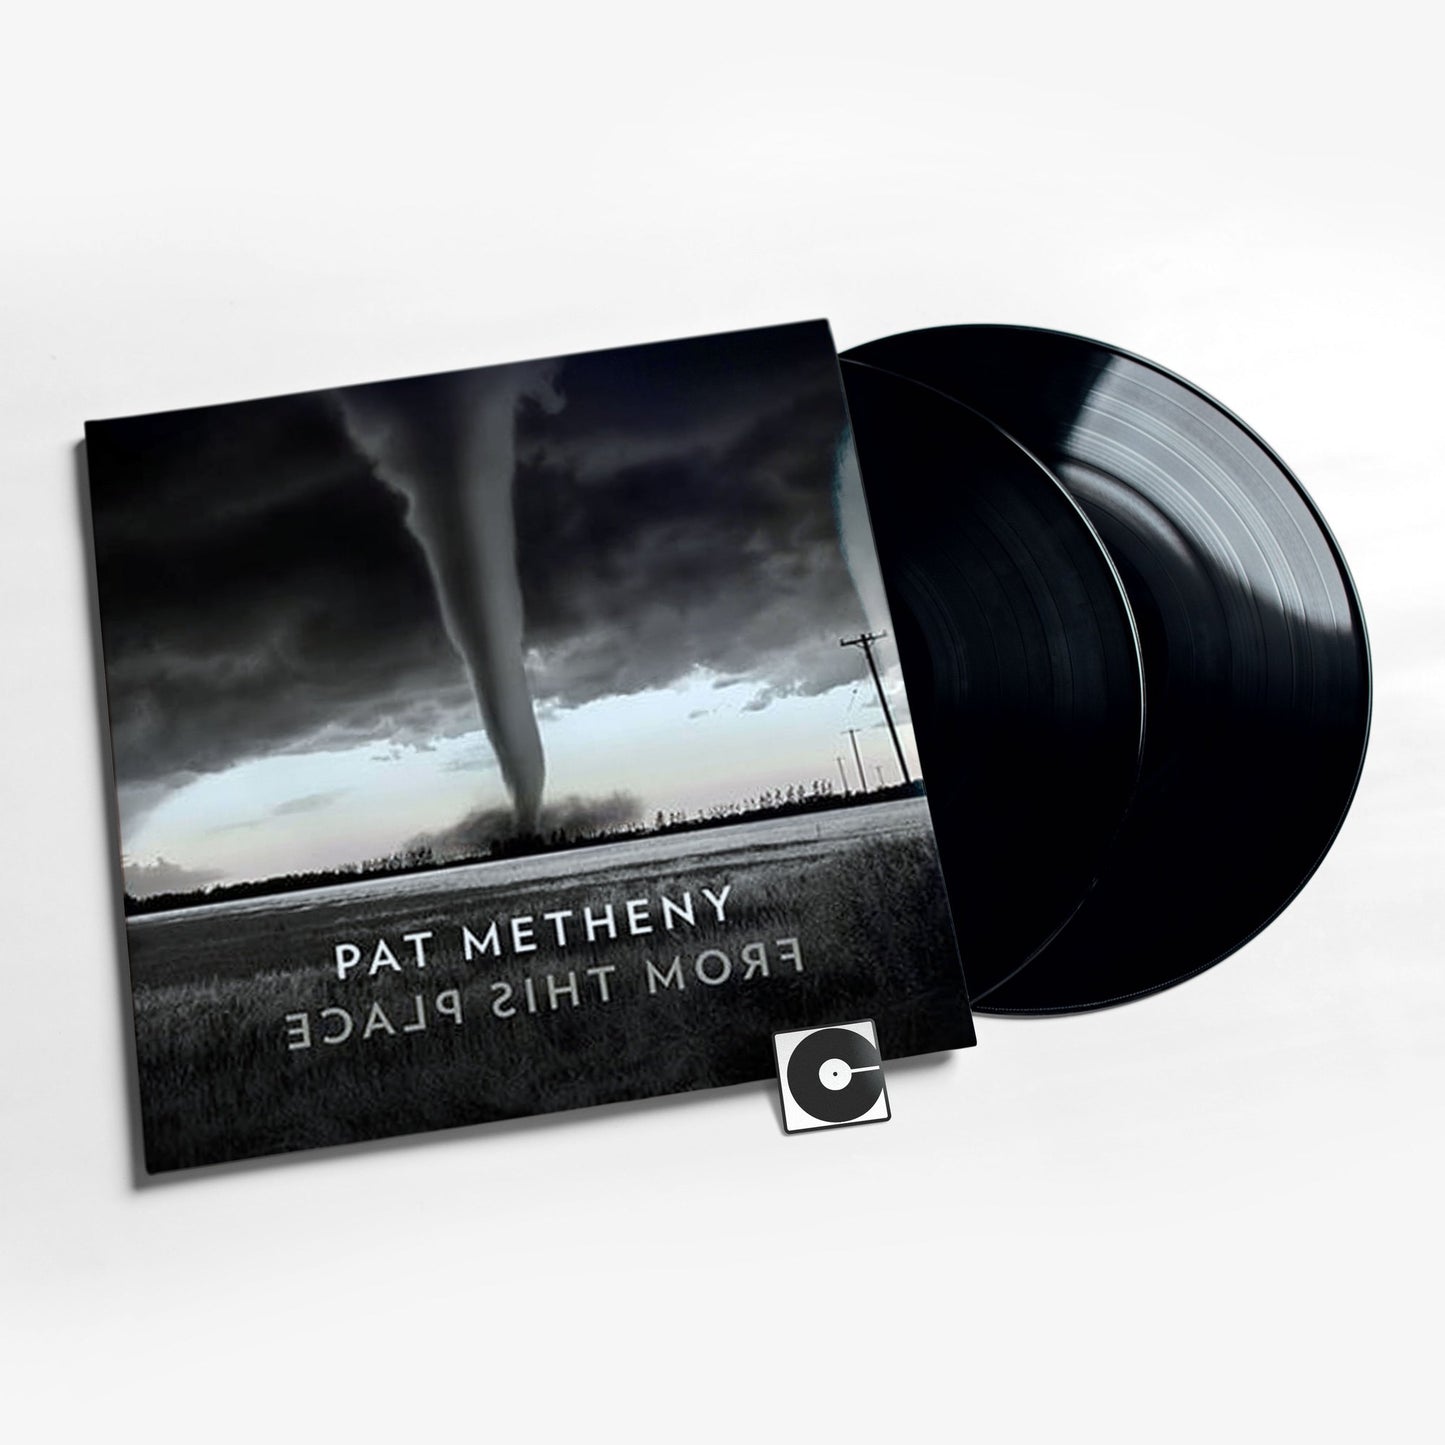 Pat Metheny - "From This Place"